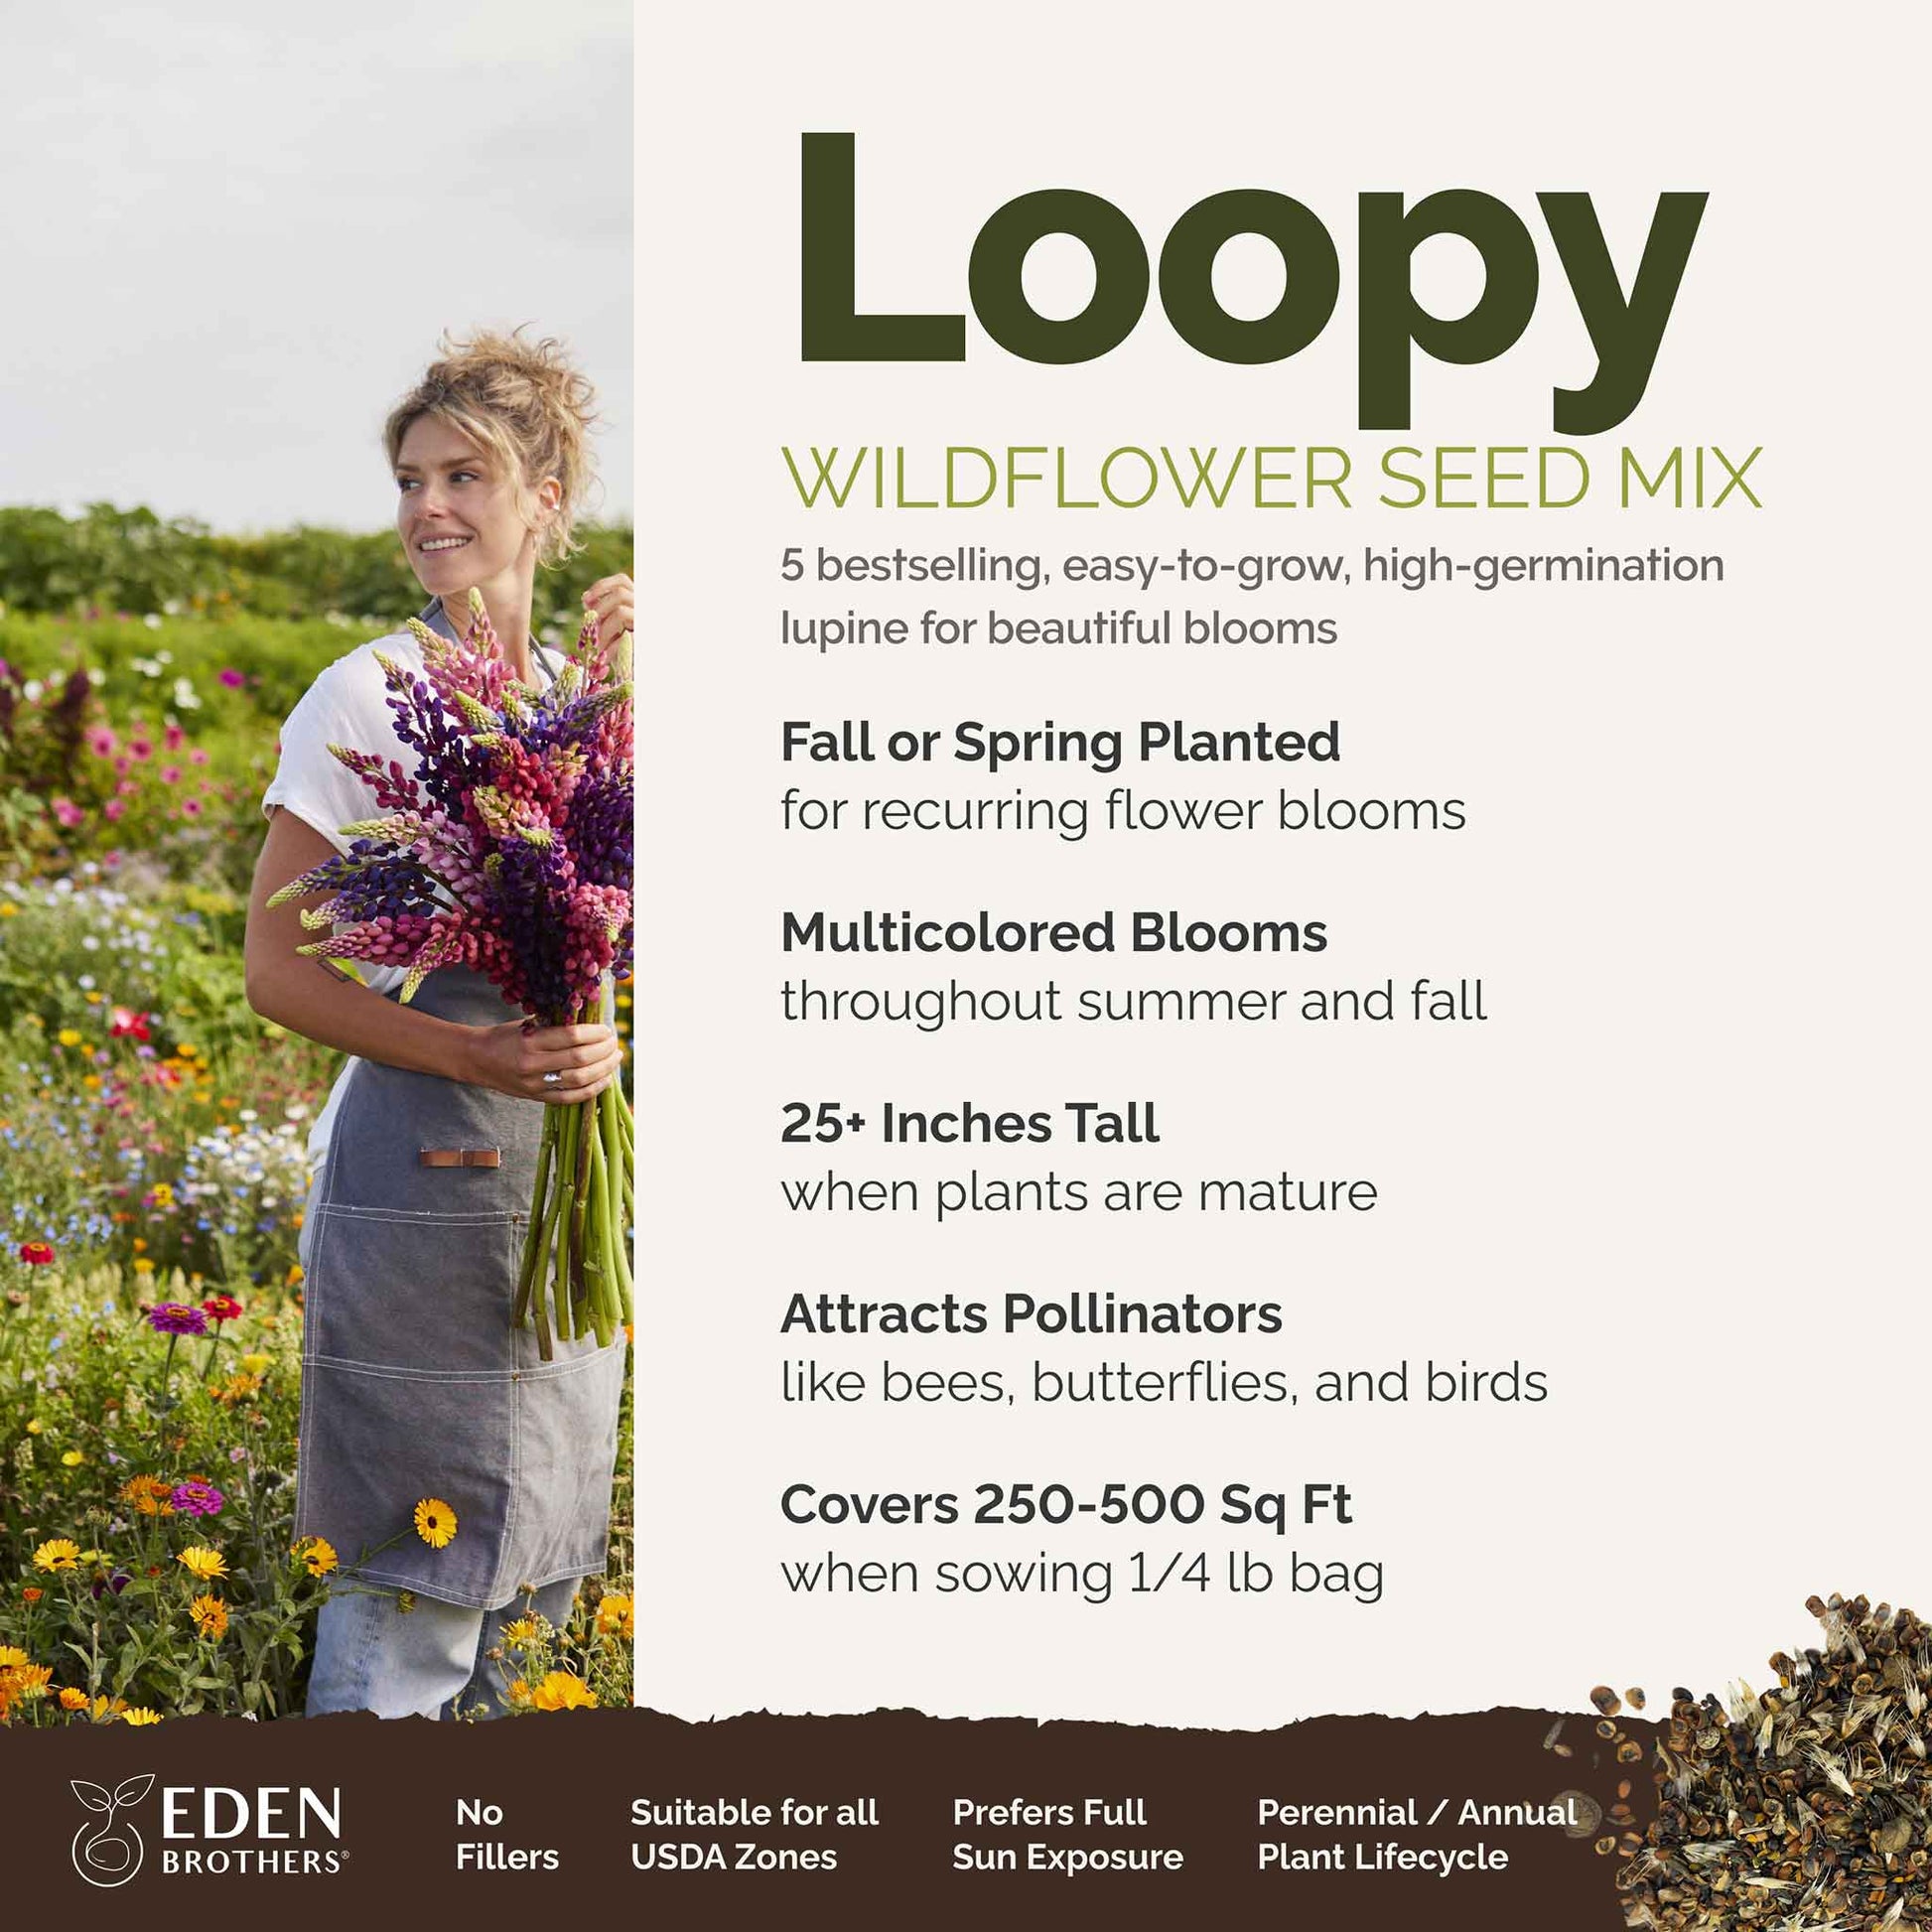 loopy overview